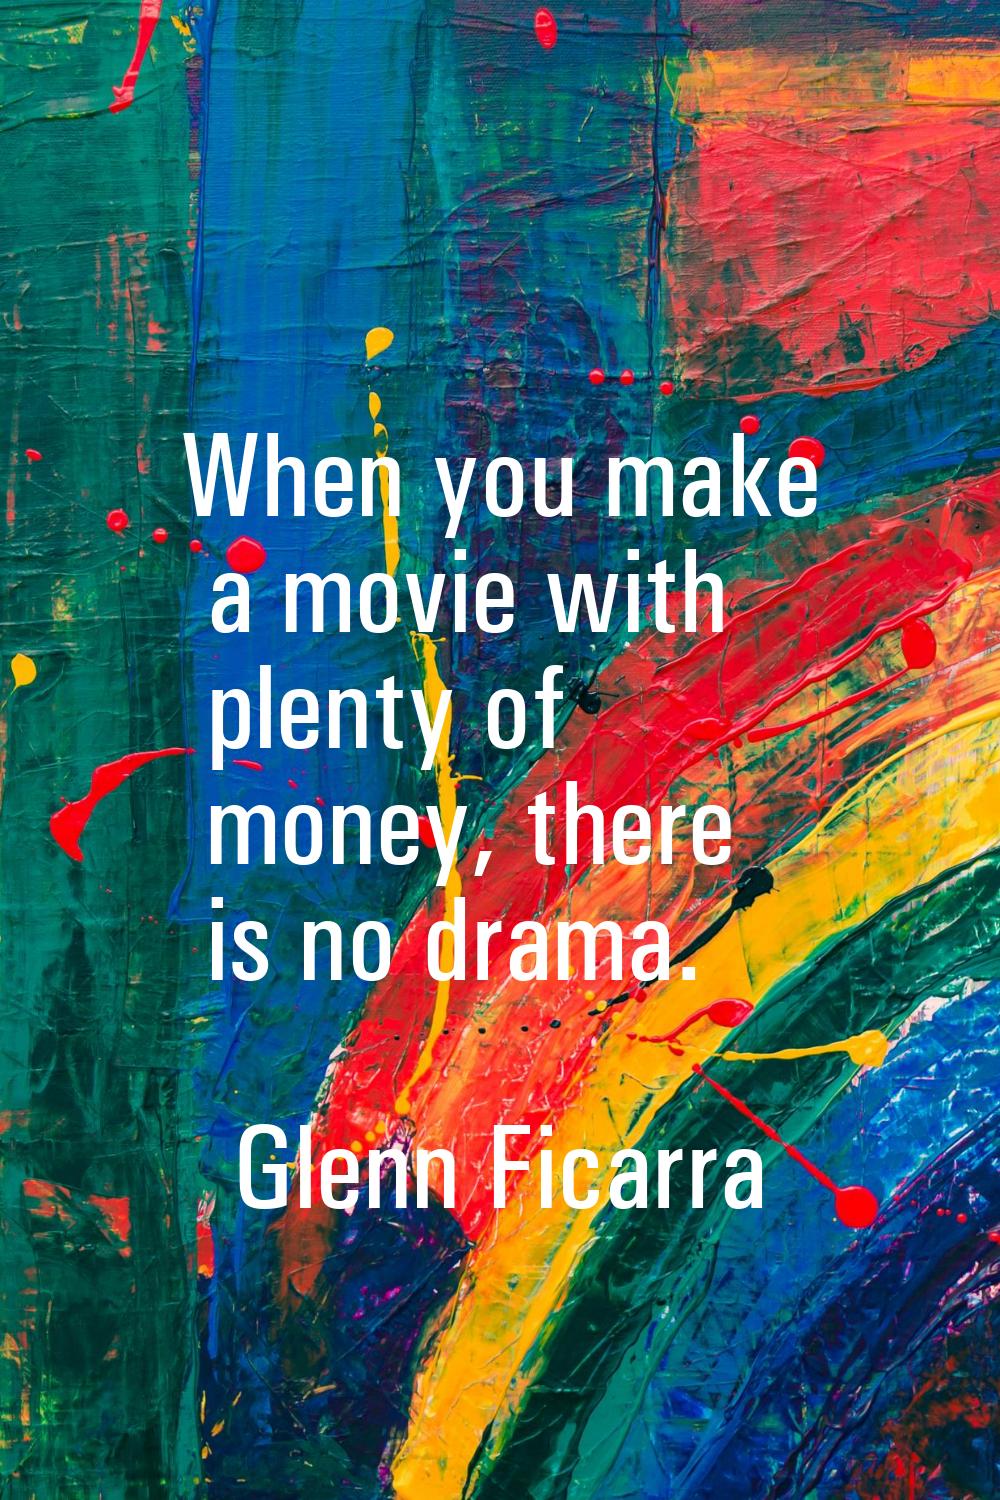 When you make a movie with plenty of money, there is no drama.